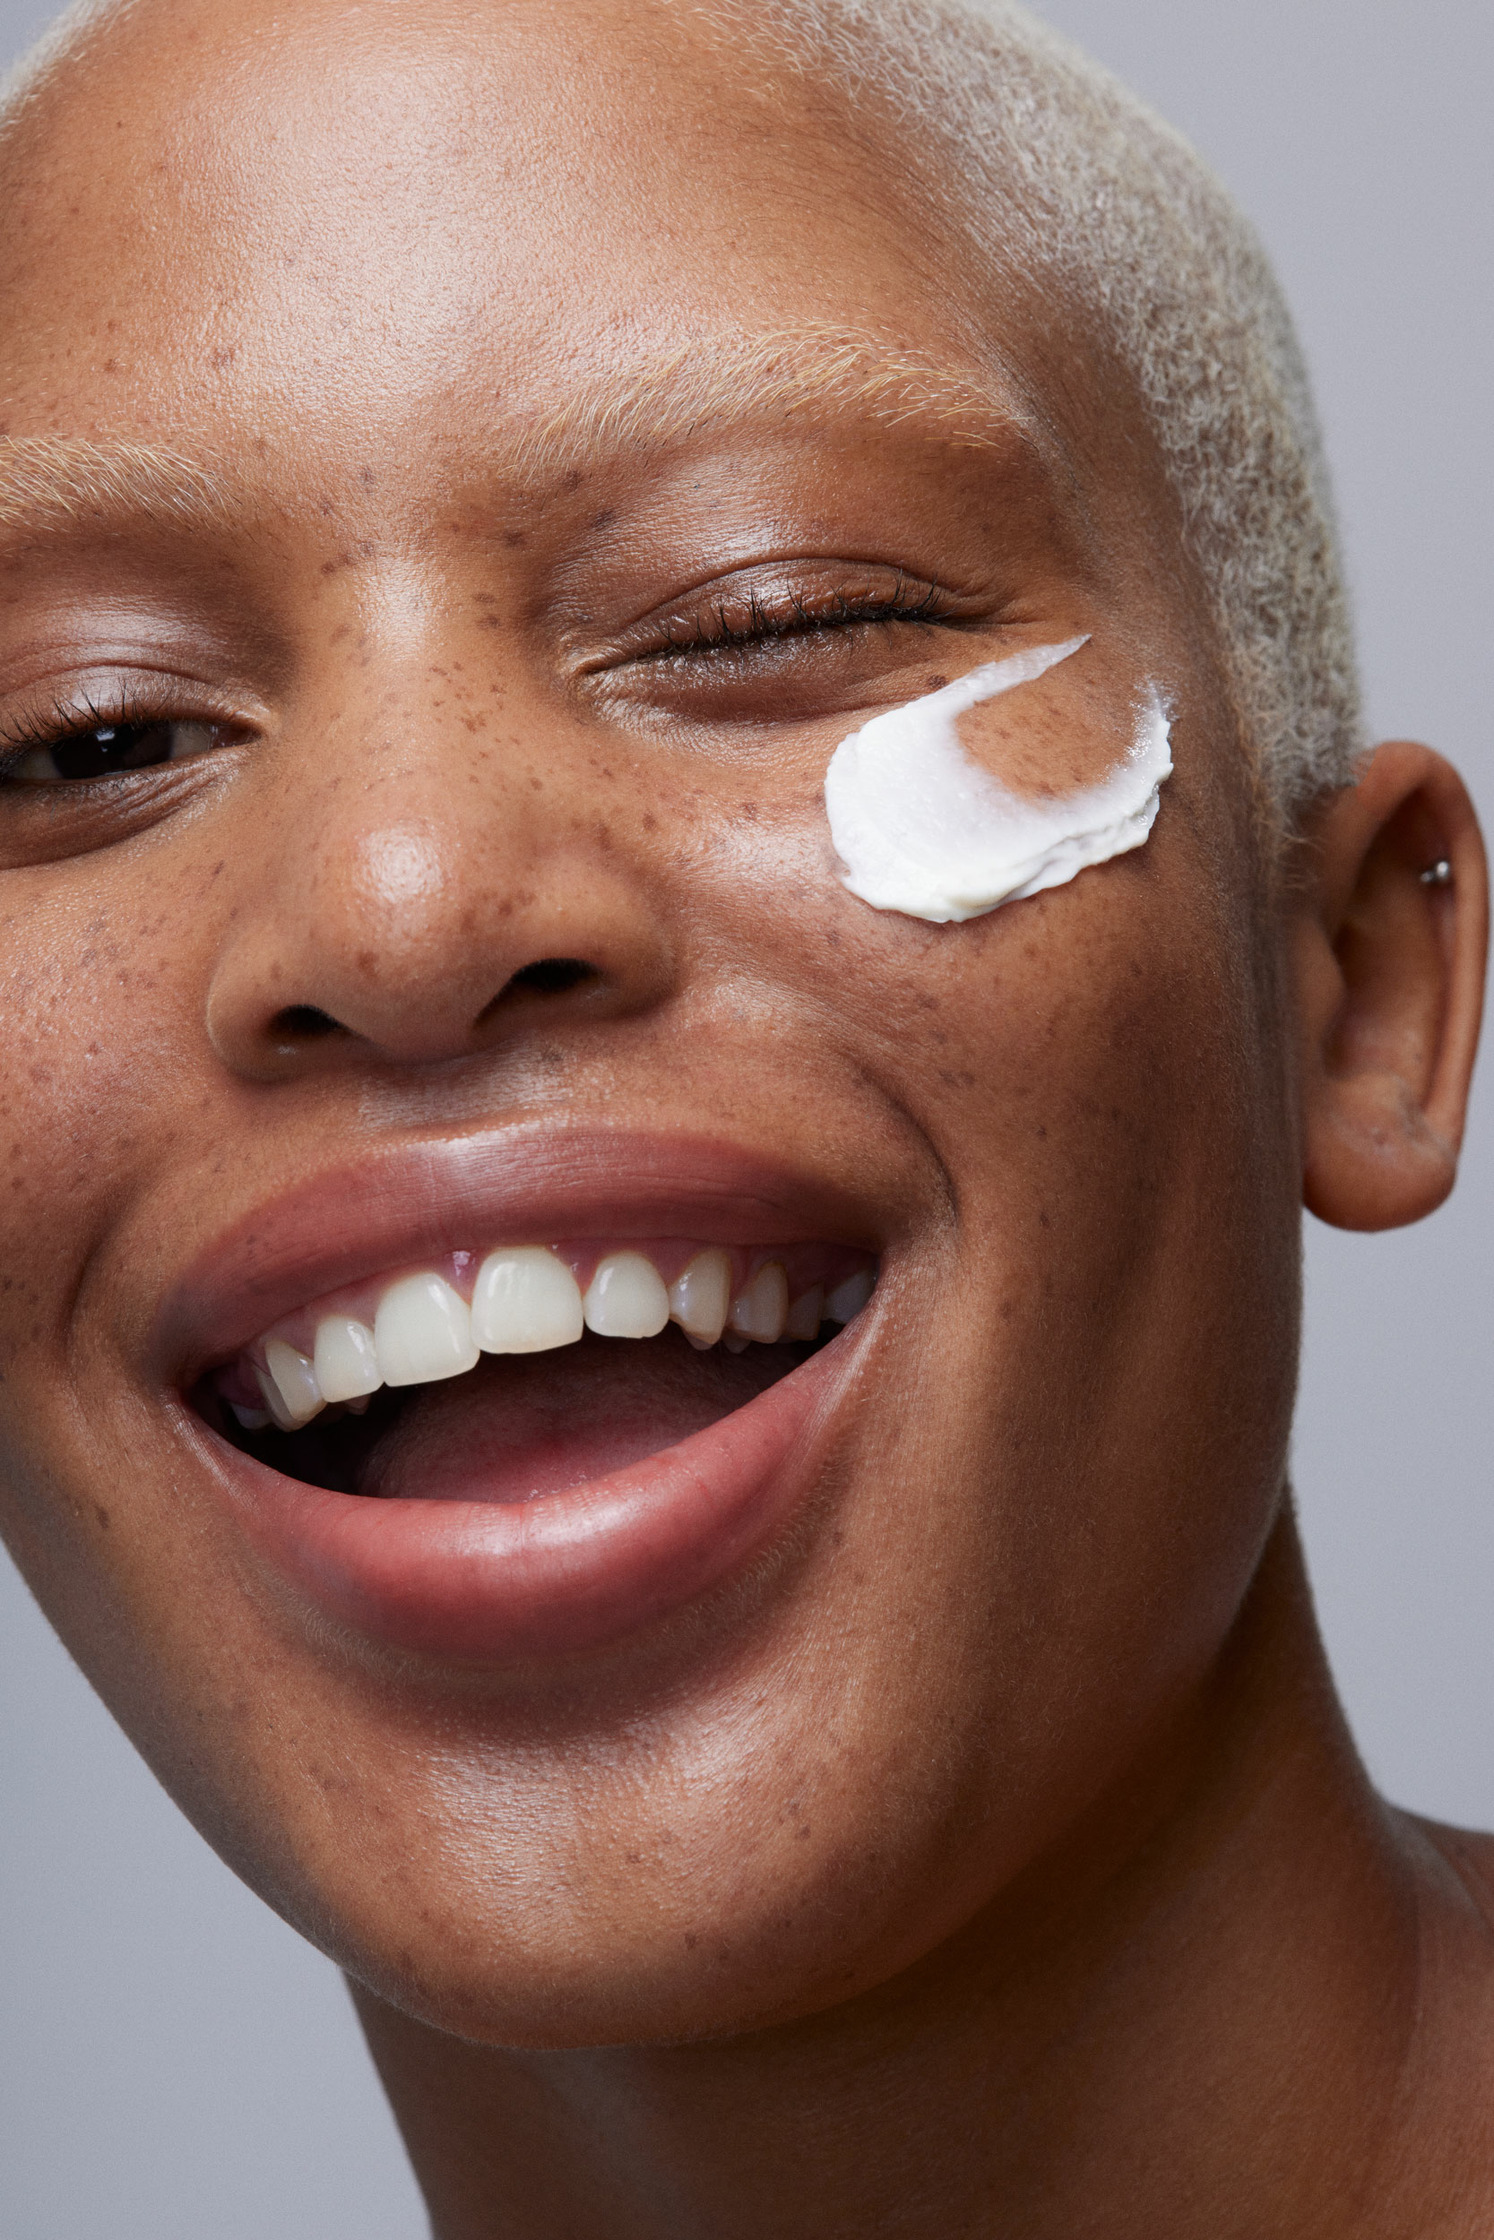 a woman smiling with a cream on her face
@unamabasa @coreartistmanagement #makeup @agaolszanski @fraukefischer